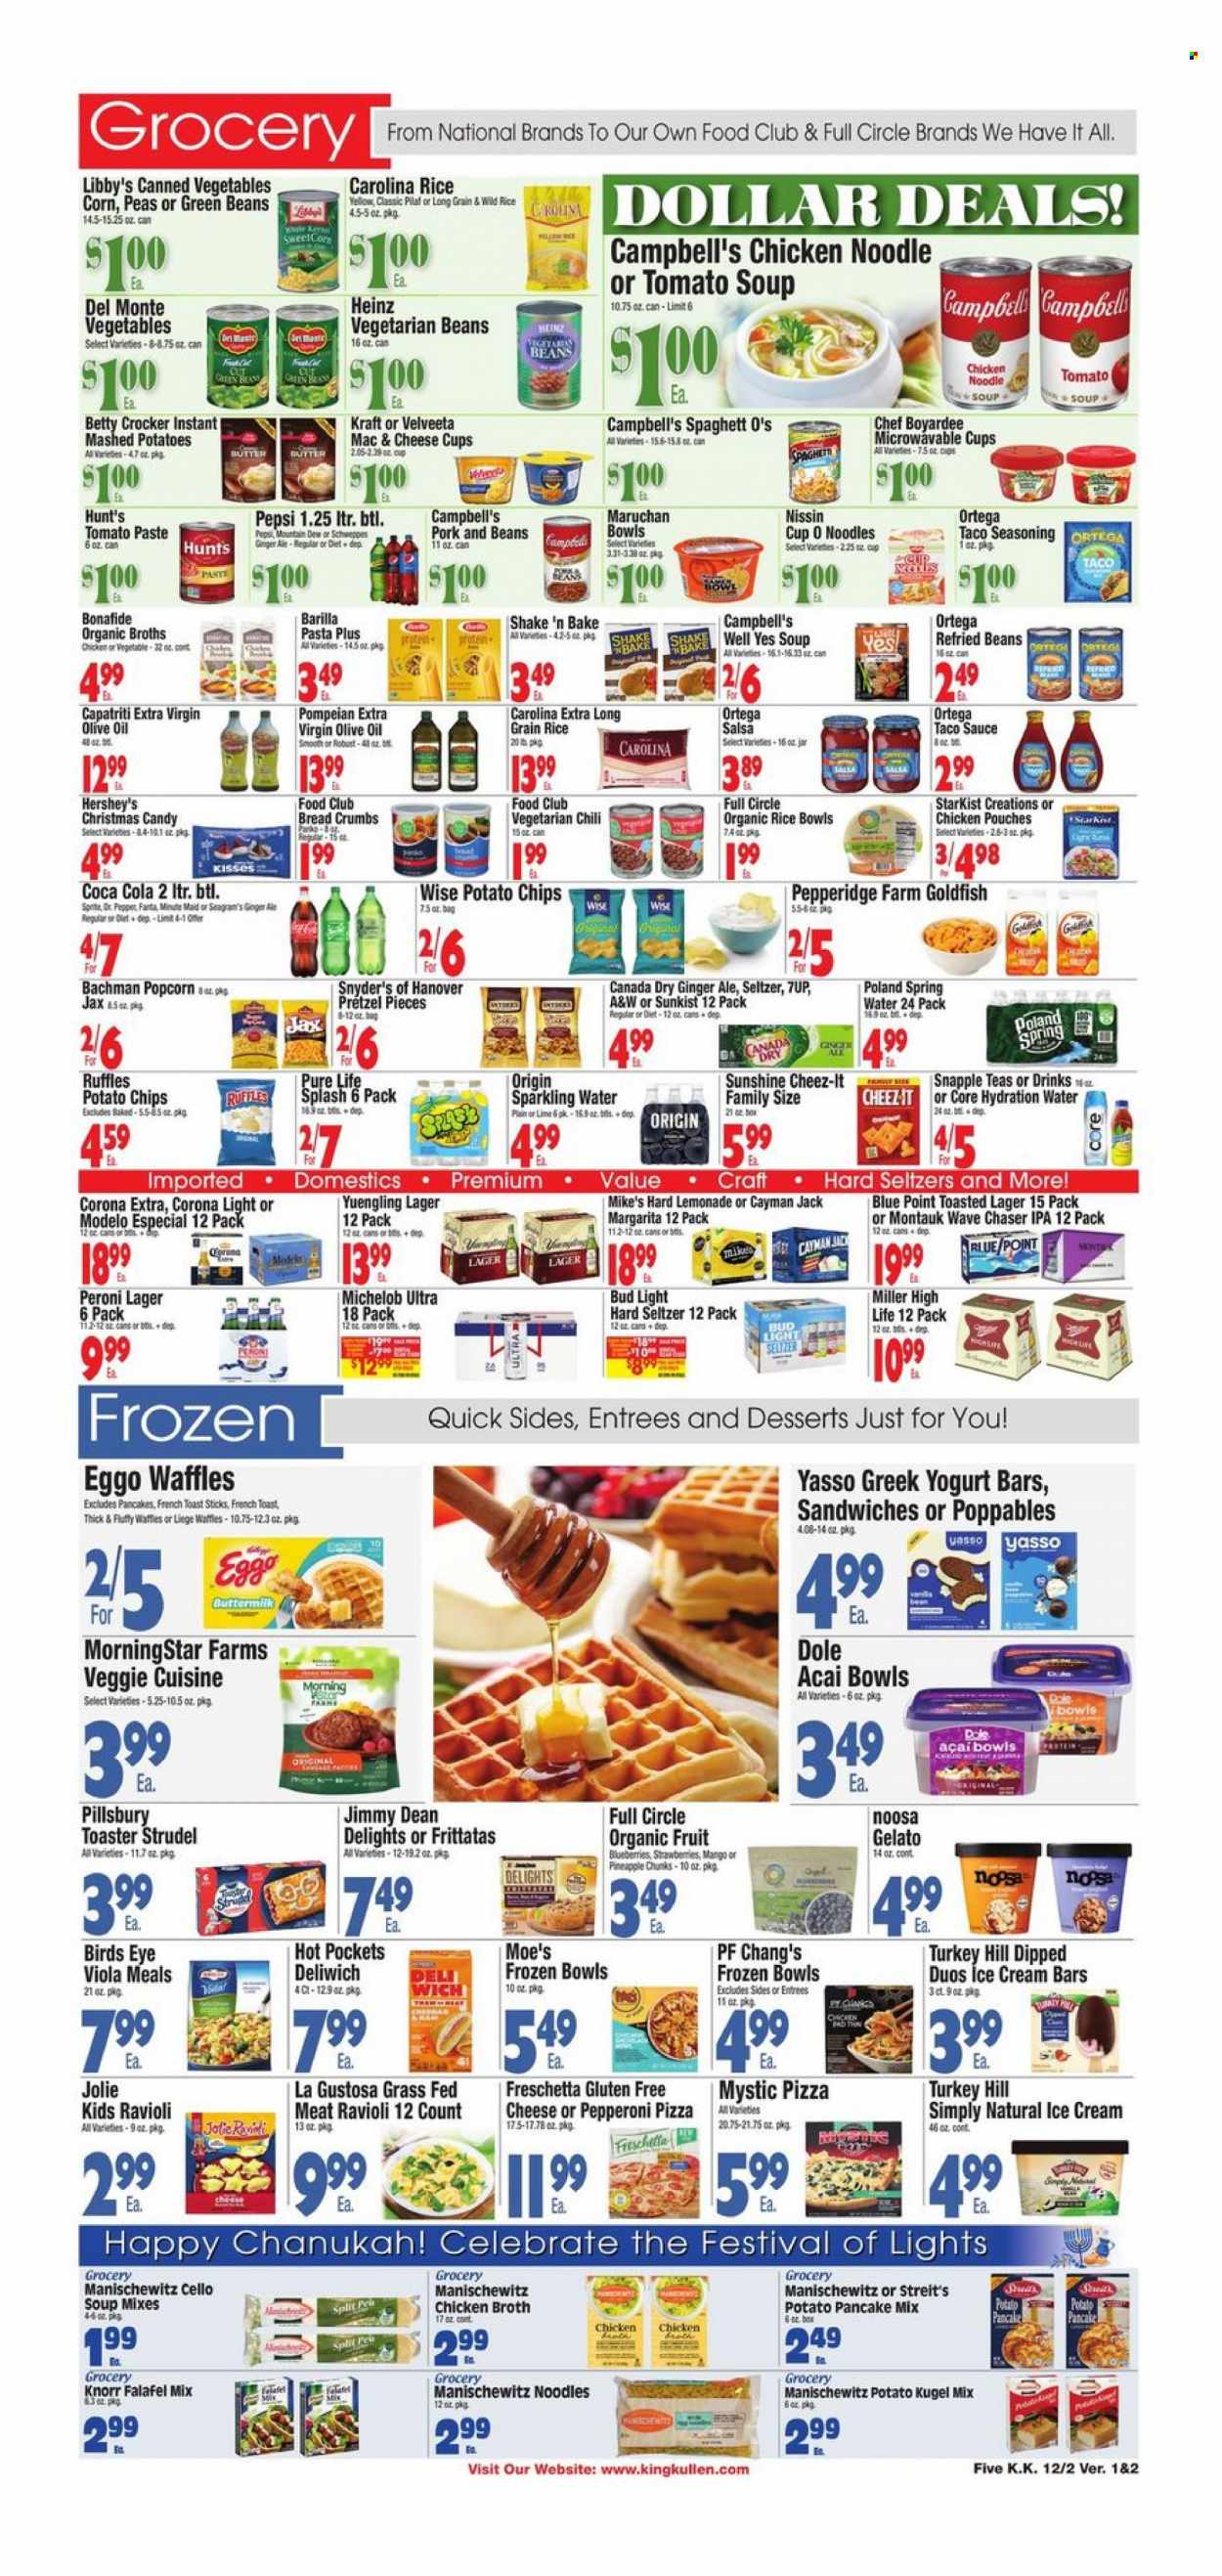 thumbnail - King Kullen Flyer - 12/02/2022 - 12/08/2022 - Sales products - pretzels, strudel, waffles, breadcrumbs, corn, green beans, peas, Dole, blueberries, strawberries, StarKist, Campbell's, mashed potatoes, ravioli, spaghetti, tomato soup, hot pocket, pizza, sandwich, soup, pasta, Knorr, sauce, pancakes, Pillsbury, noodles cup, Bird's Eye, Barilla, noodles, MorningStar Farms, Kraft®, Nissin, Jimmy Dean, cheese cup, greek yoghurt, buttermilk, shake, Sunshine, ice cream, ice cream bars, Hershey's, gelato, potato chips, popcorn, Goldfish, Cheez-It, Ruffles, chicken broth, broth, refried beans, tomato paste, Heinz, canned vegetables, Chef Boyardee, Del Monte, long grain rice, spice, taco sauce, salsa, extra virgin olive oil, olive oil, oil, Canada Dry, Coca-Cola, ginger ale, lemonade, Mountain Dew, Schweppes, Sprite, Pepsi, Fanta, 7UP, Snapple, A&W, fruit punch, spring water, sparkling water, Hard Seltzer, beer, Bud Light, Corona Extra, Peroni, Miller, Lager, IPA, Modelo, WAVE, bowl, Yuengling, Michelob. Page 5.